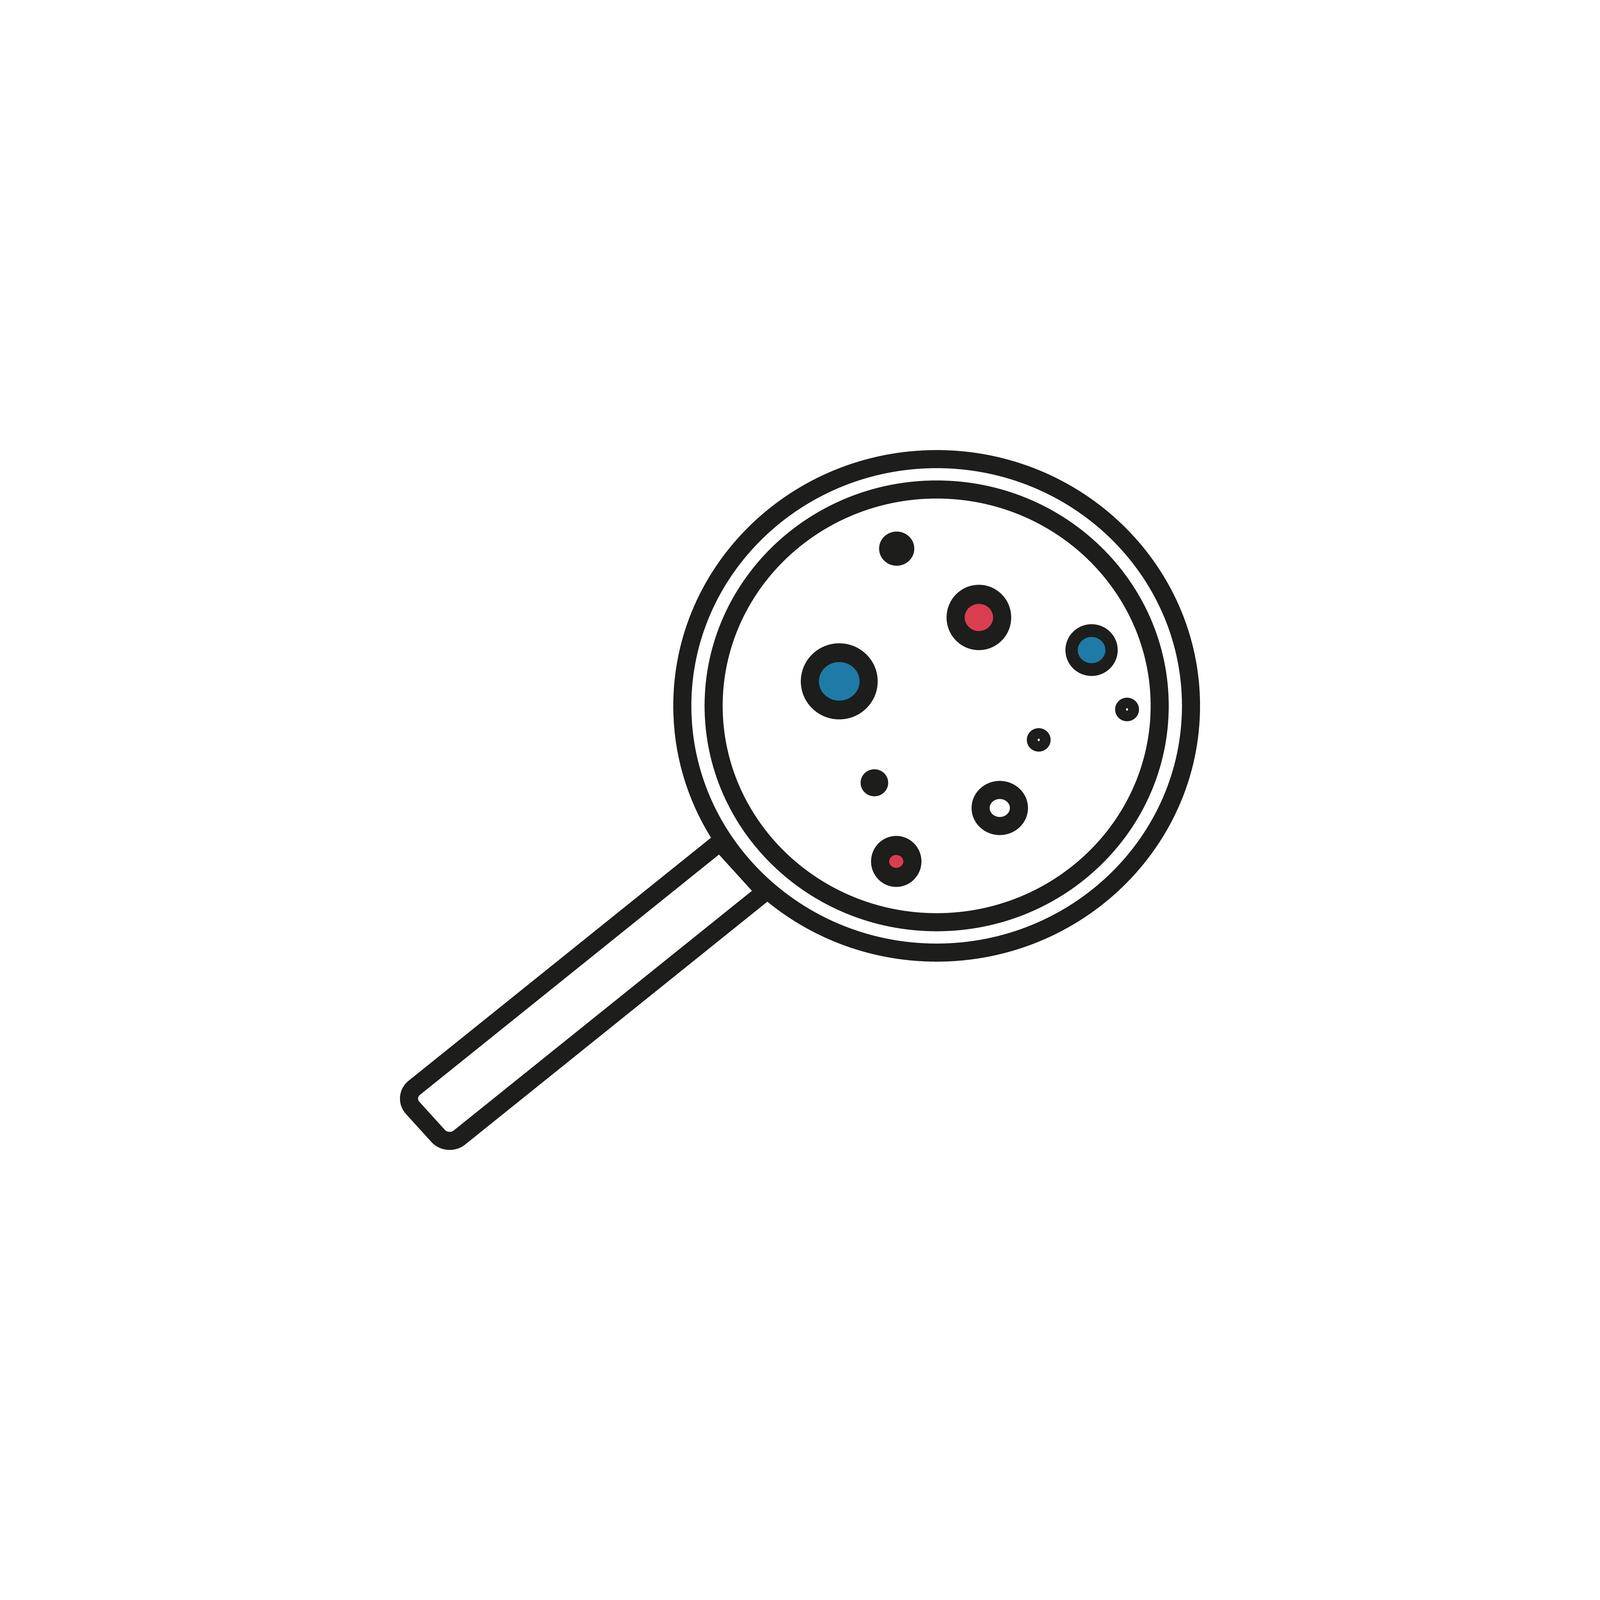 Magnifying glass with lingia virus icon vector illustration. Magnifier with germs research concept. Microbiological and medical analysis. Logo magnifier simple flat web element.